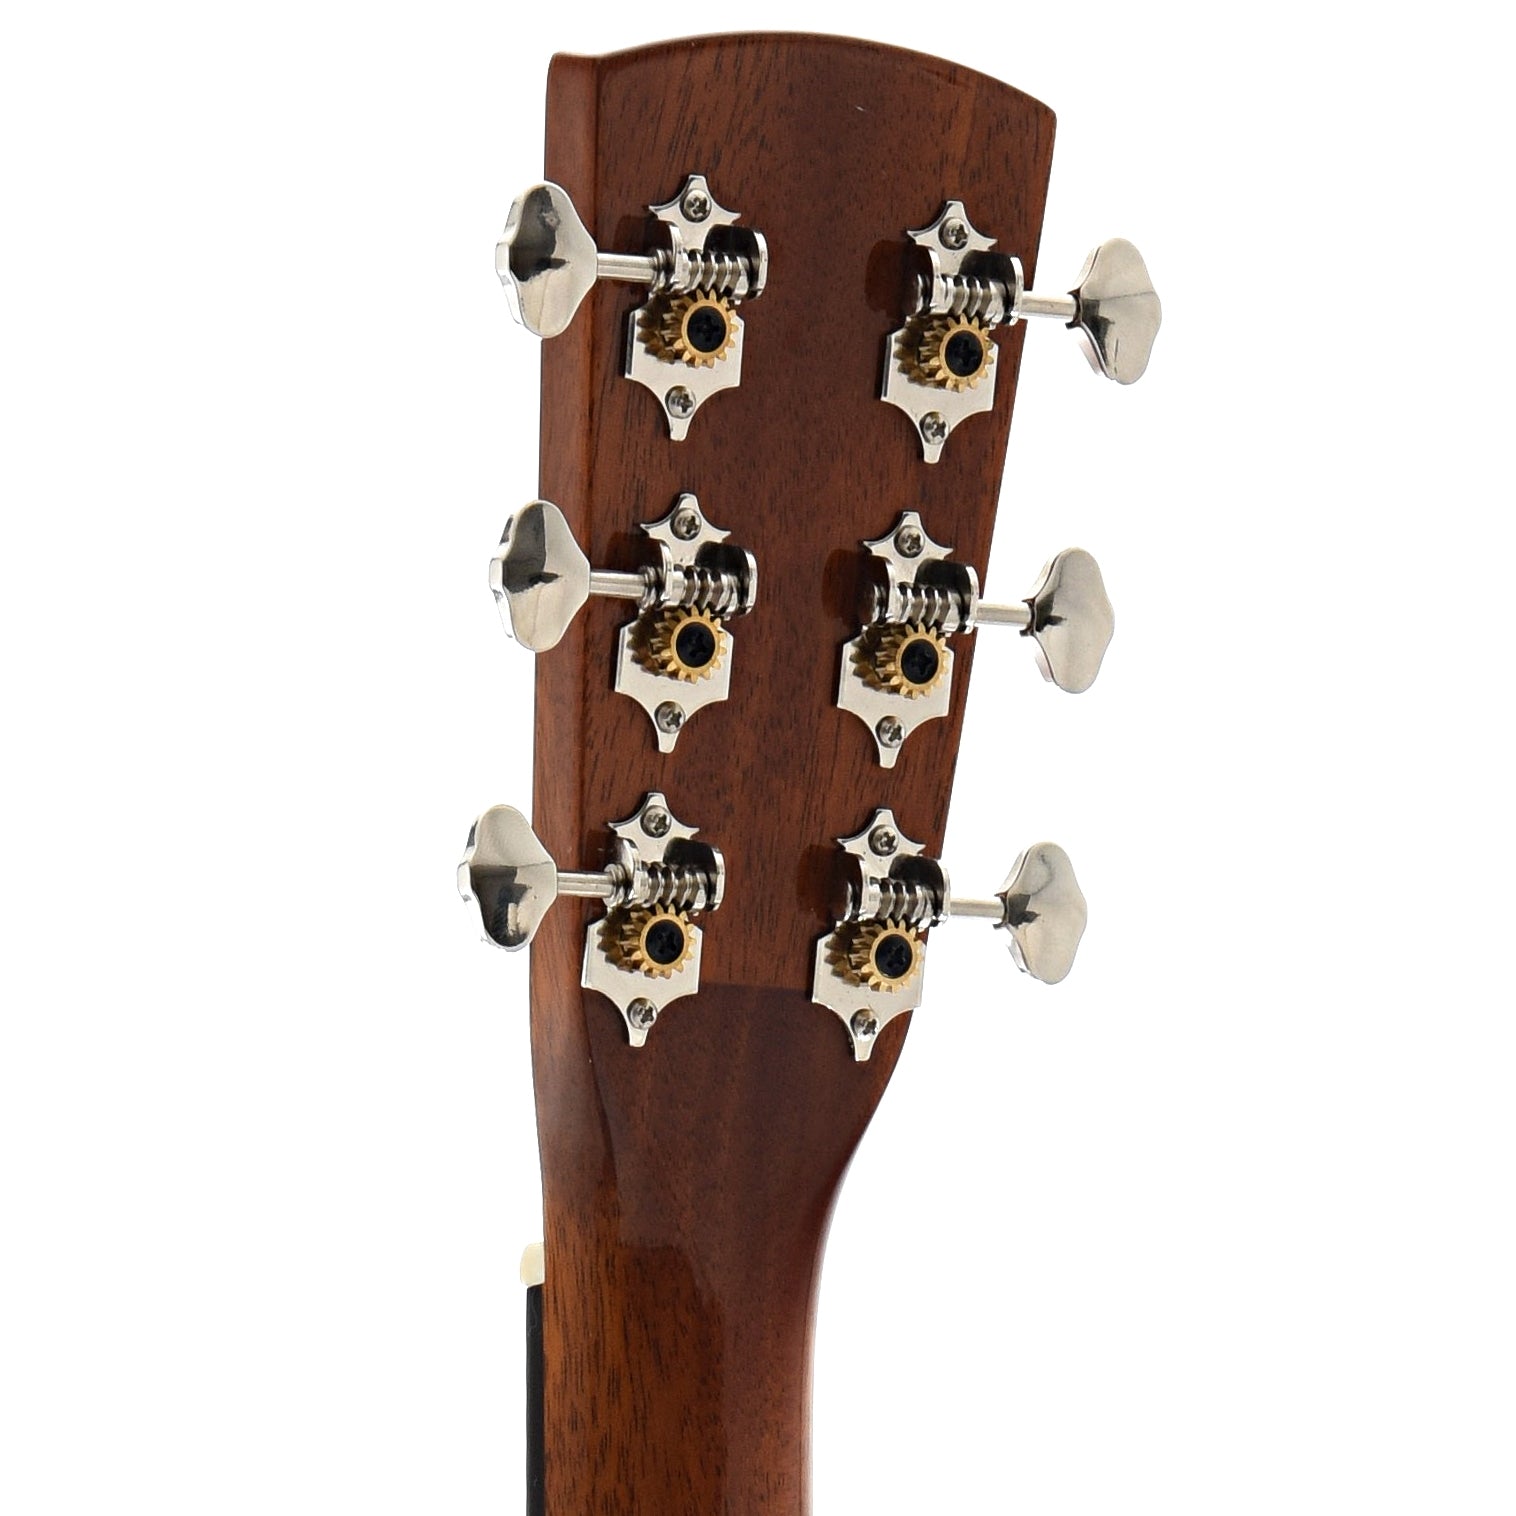 Image 7 of Blueridge Contemporary Series BR-41 "Baby" Acoustic Guitar - SKU# BR41 : Product Type Flat-top Guitars : Elderly Instruments